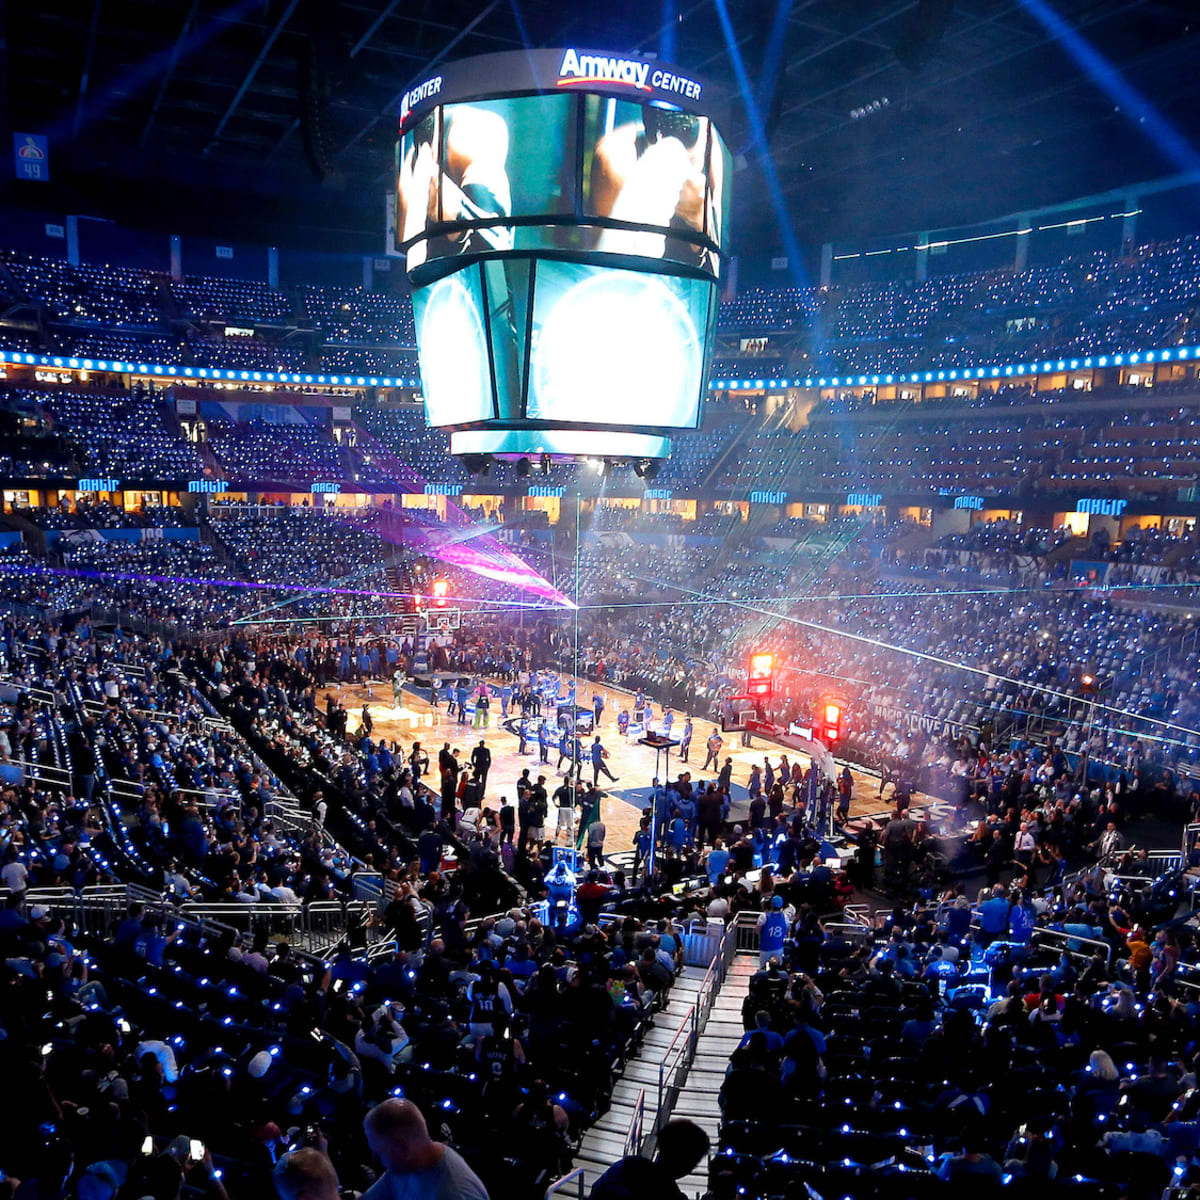 WWE ThunderDome: SummerSlam 2020 moving to Amway Center - Sports